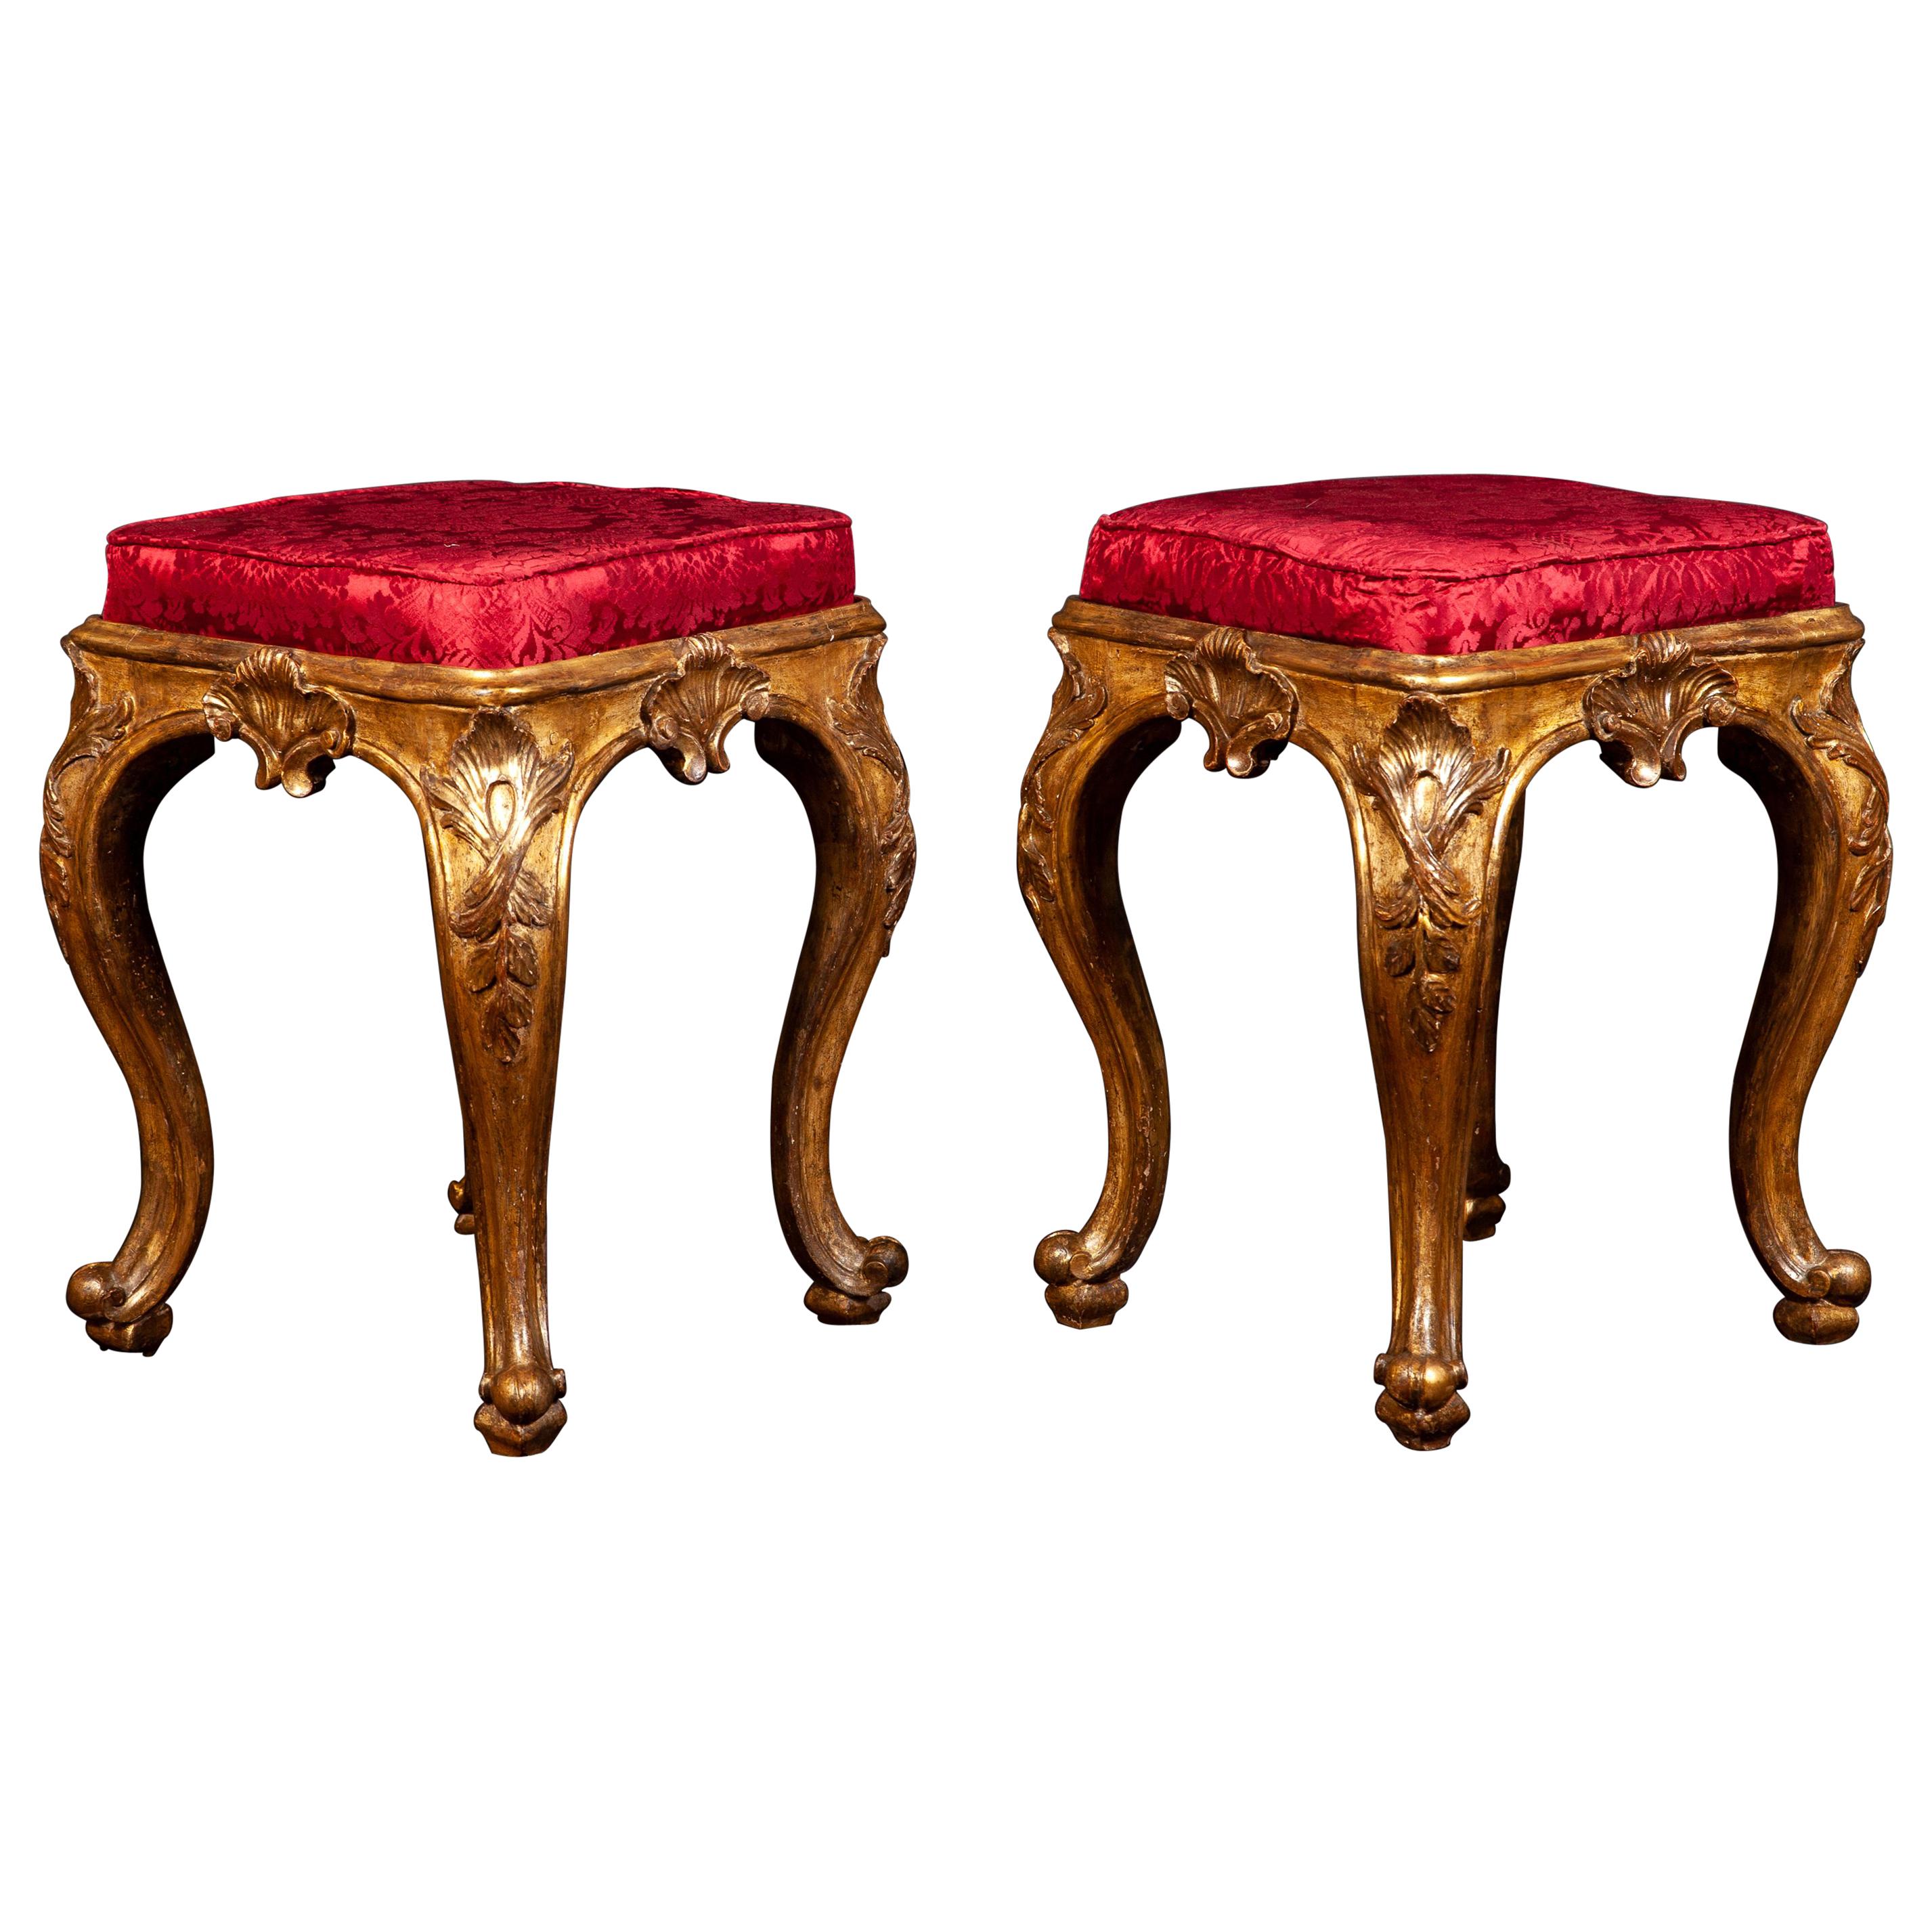 Pair of Italian 18th Century Giltwood Stools Roma, 1750 For Sale 2